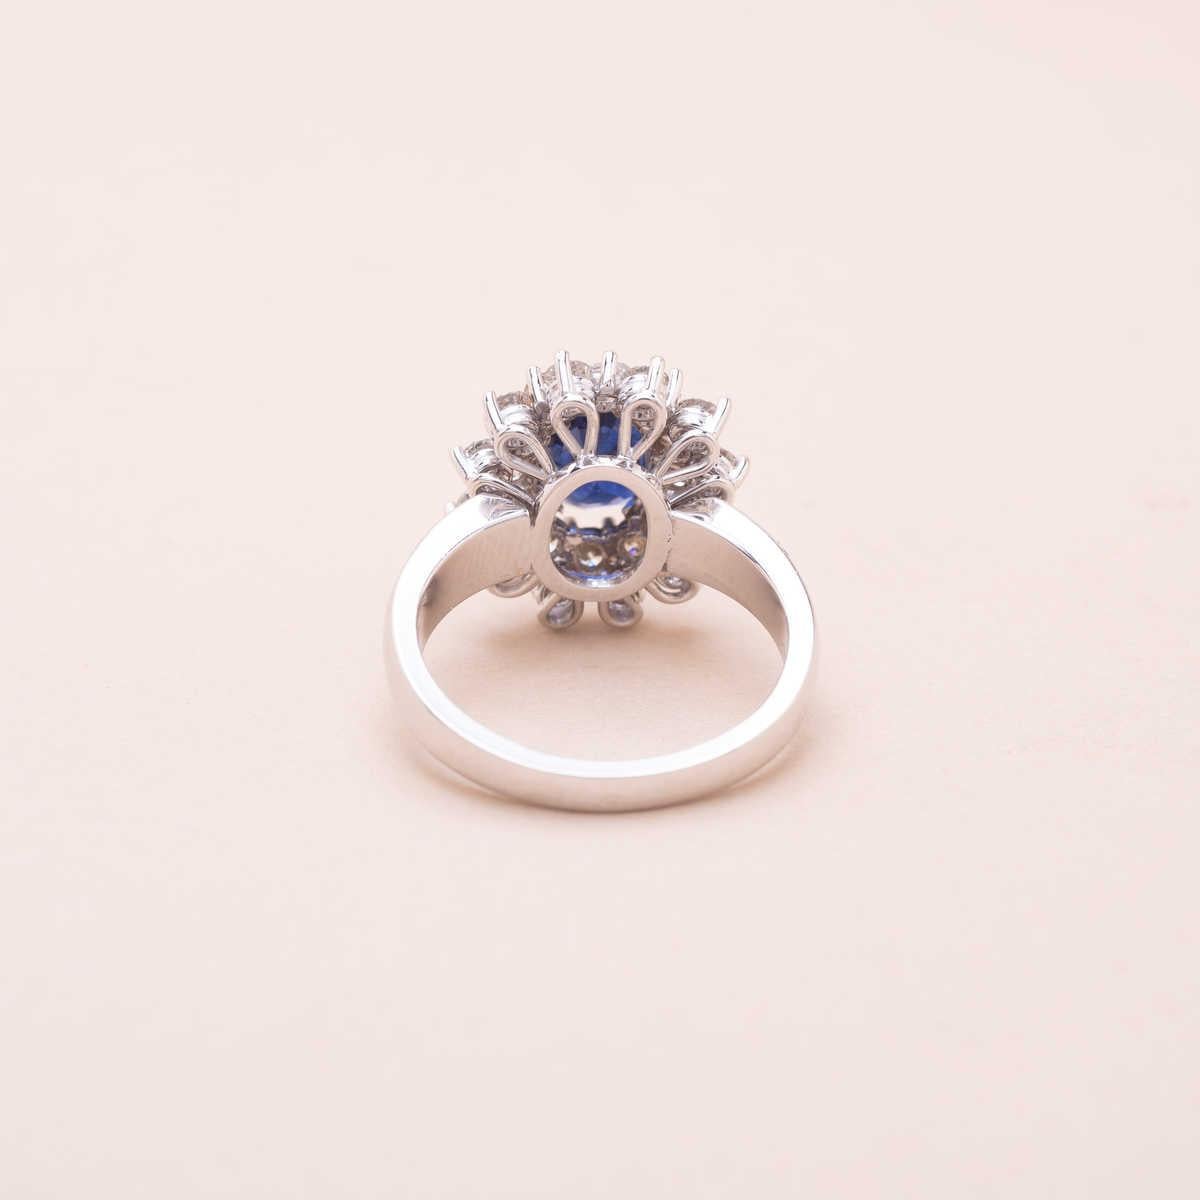 Contemporary 1.91 carat Sapphire and Diamonds Cluster Ring For Sale